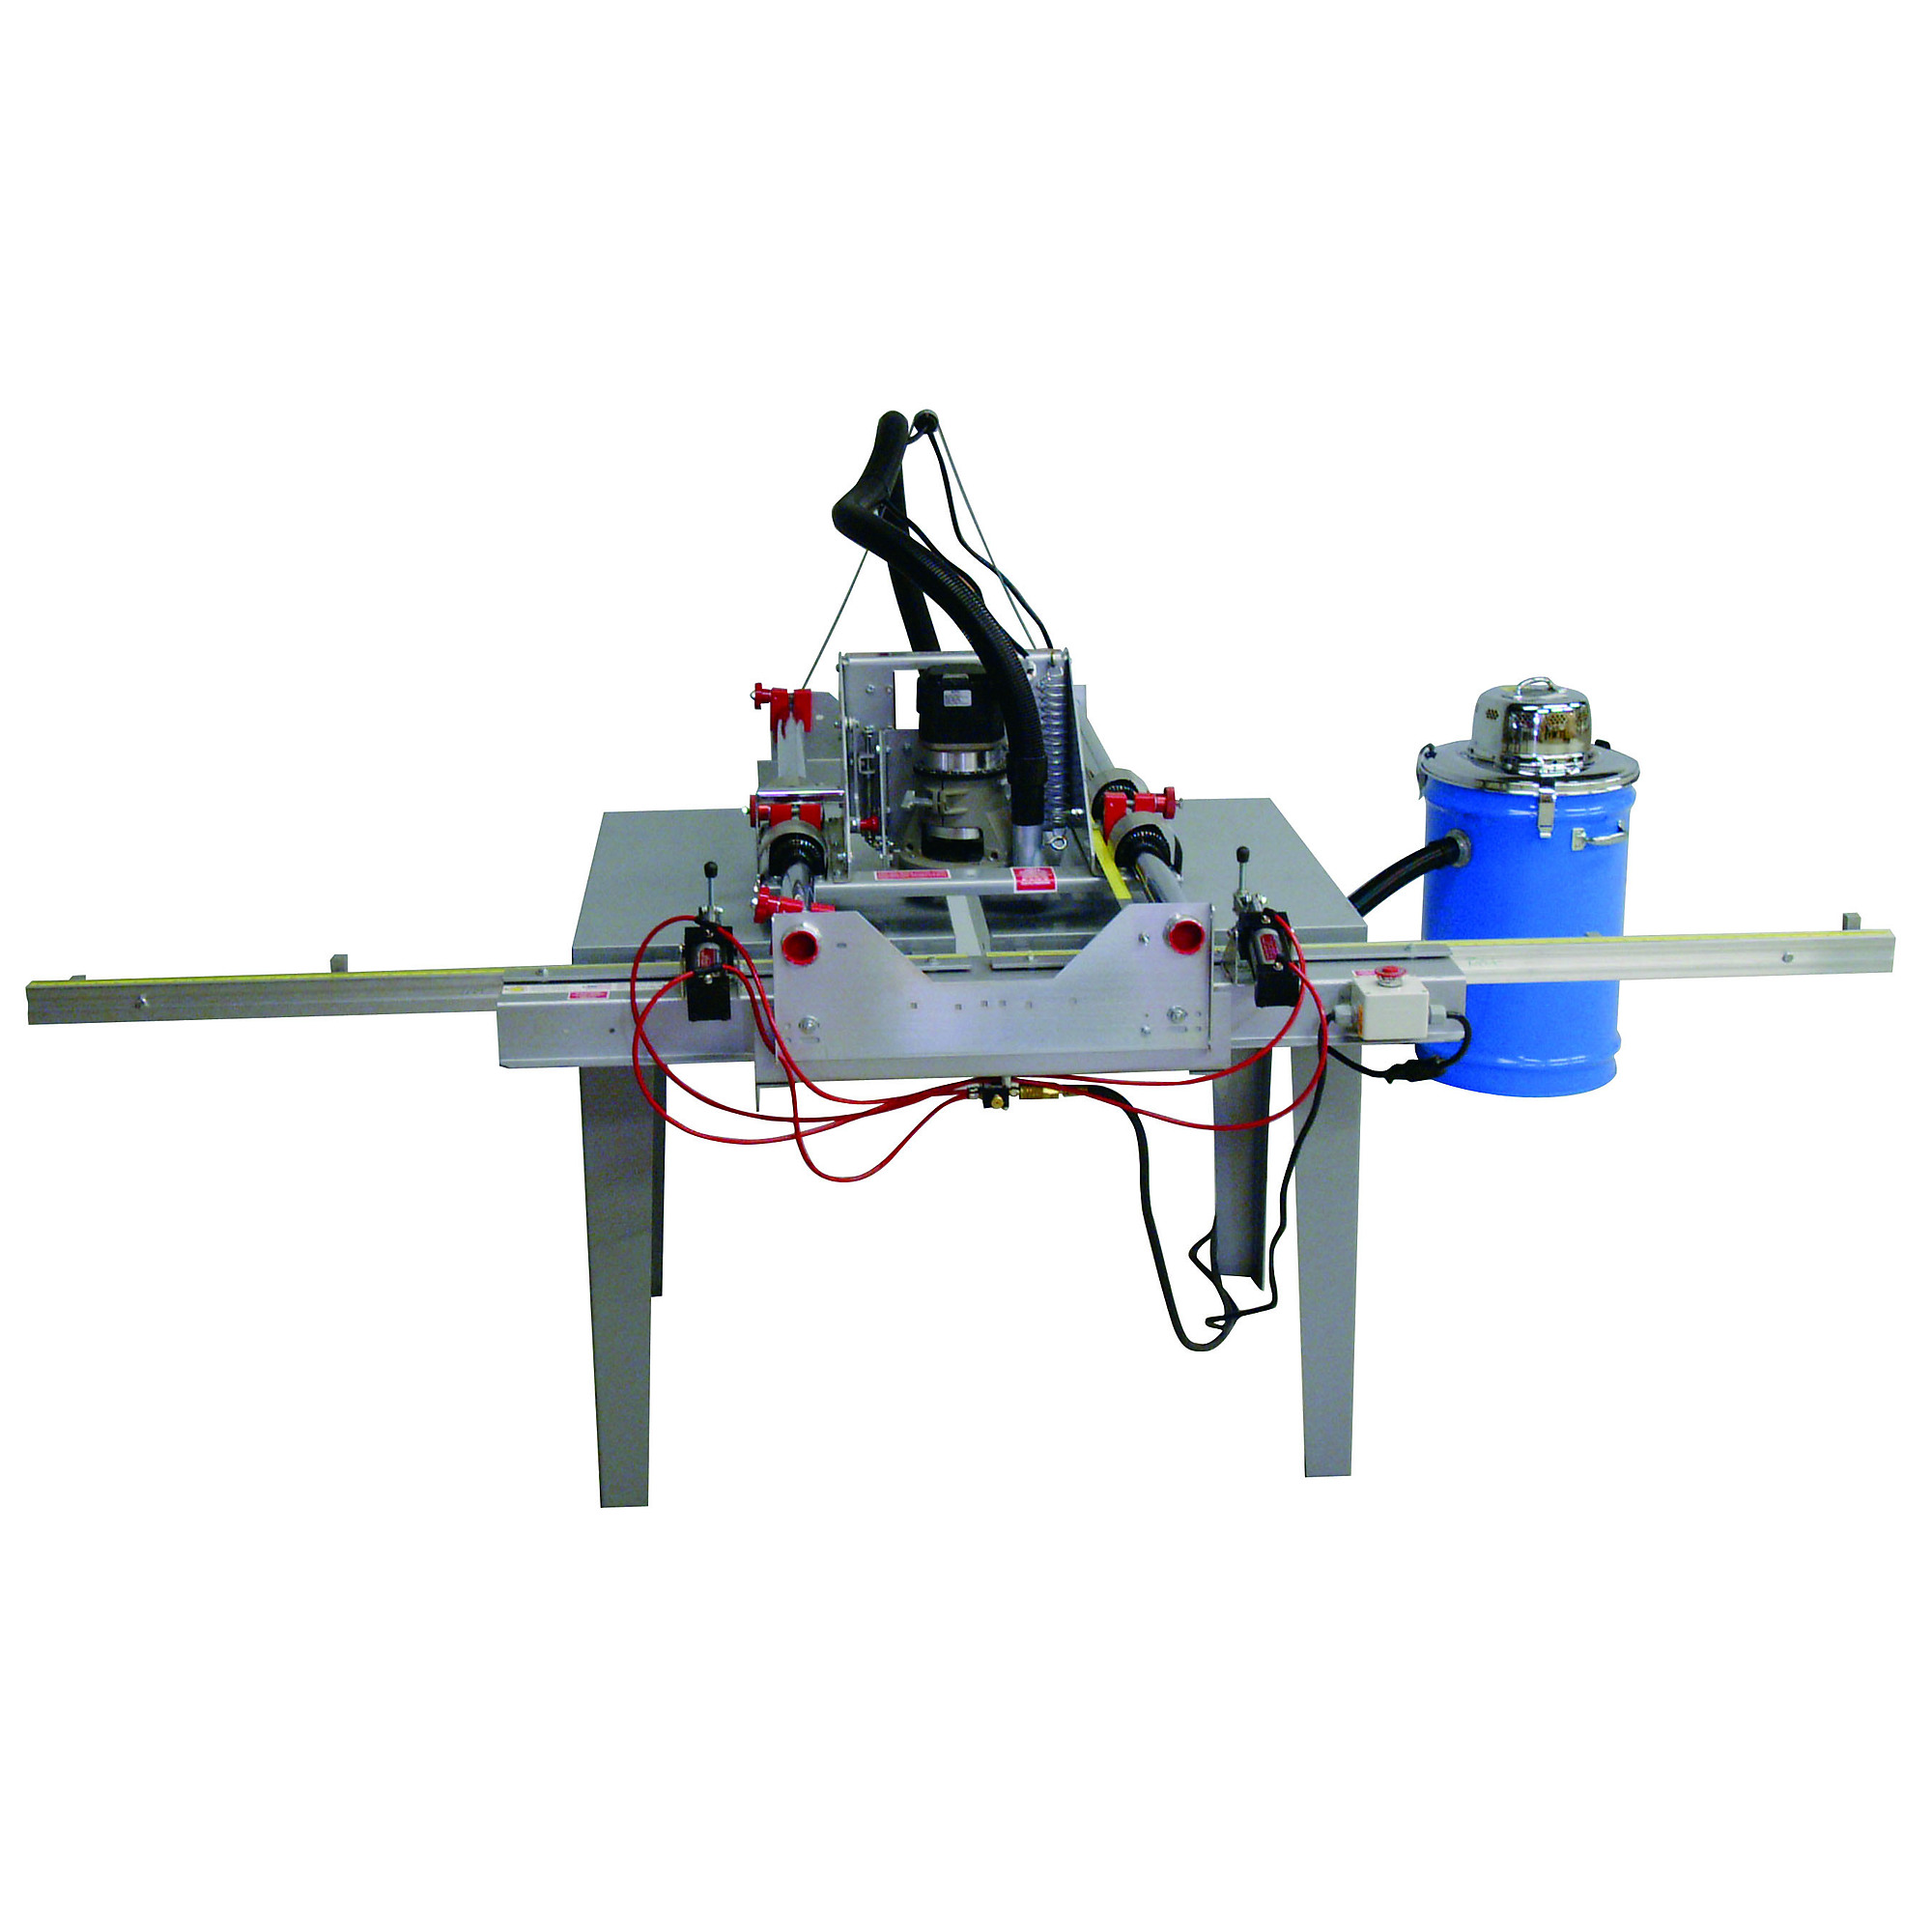 Safety Speed Manufacturing, TR2 Table Router, Blade Size 8 in, Amps 15 Max. Crosscut 36 in, Model TR2